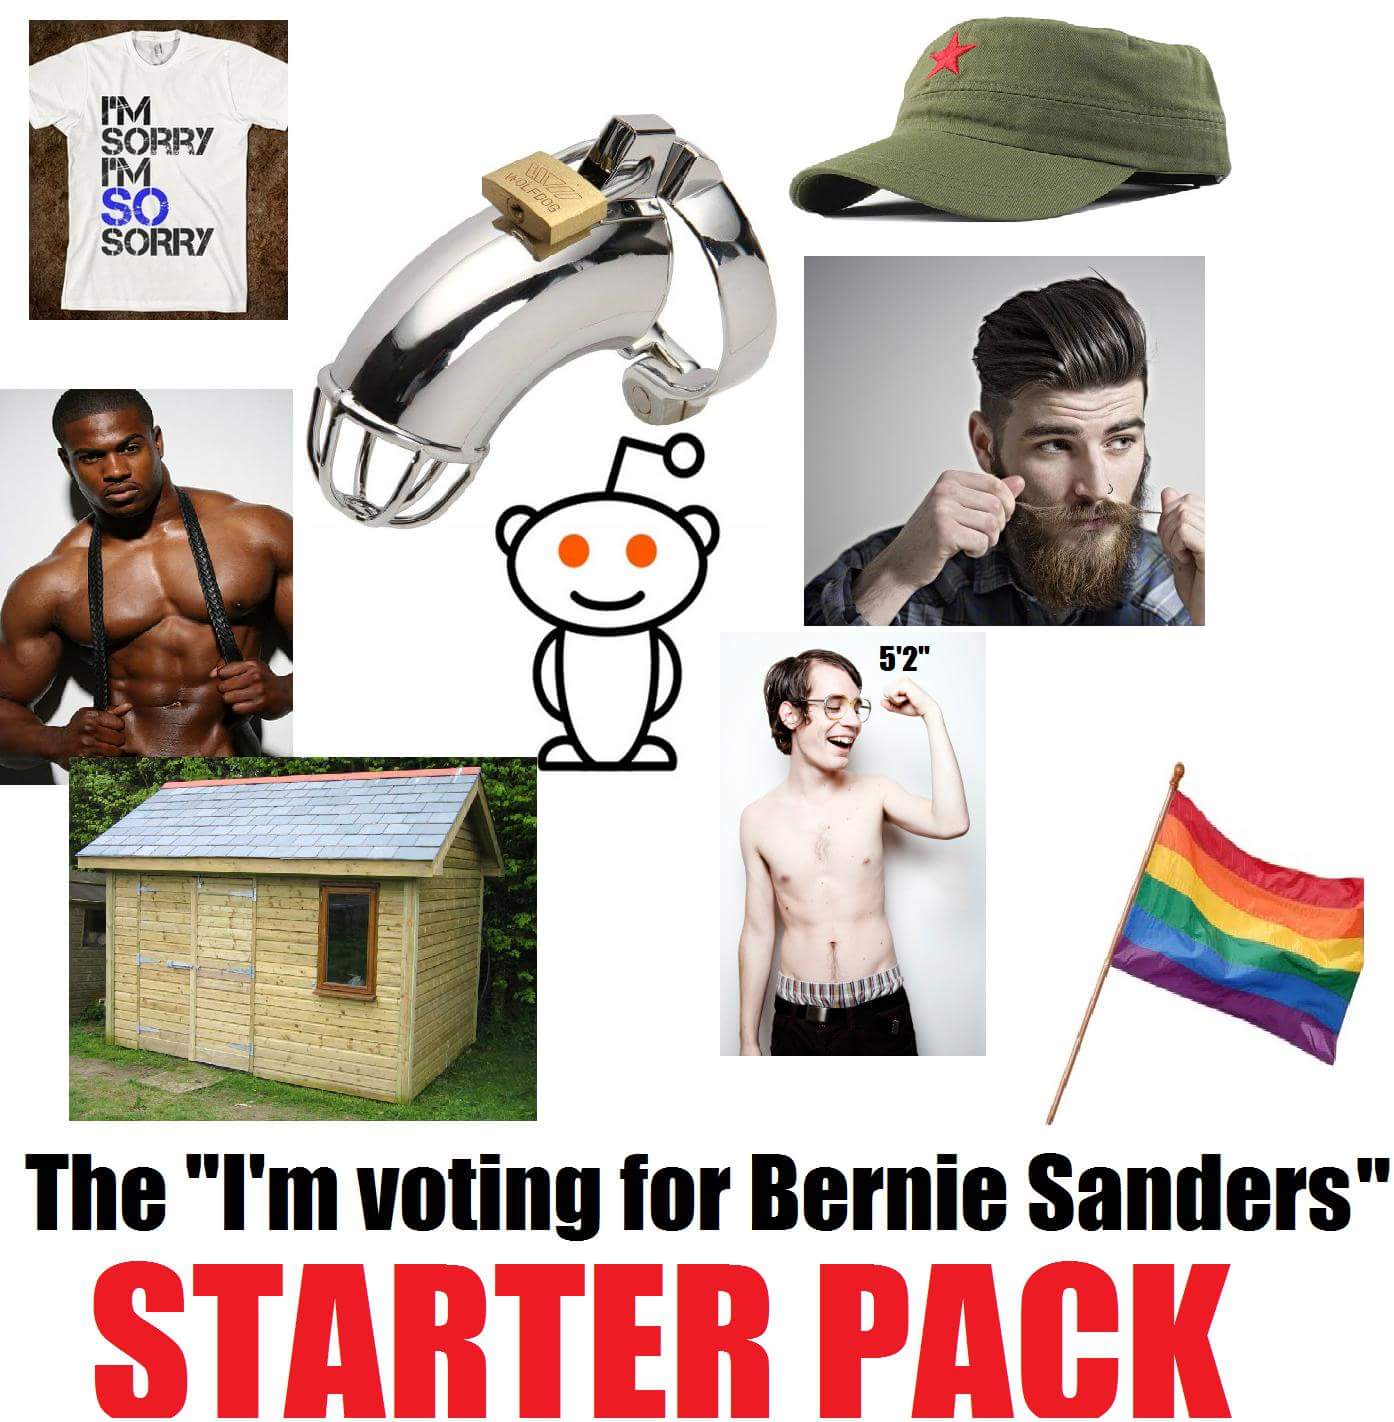 Tuesday meme about the people who vote for Bernie Sanders being gay and short